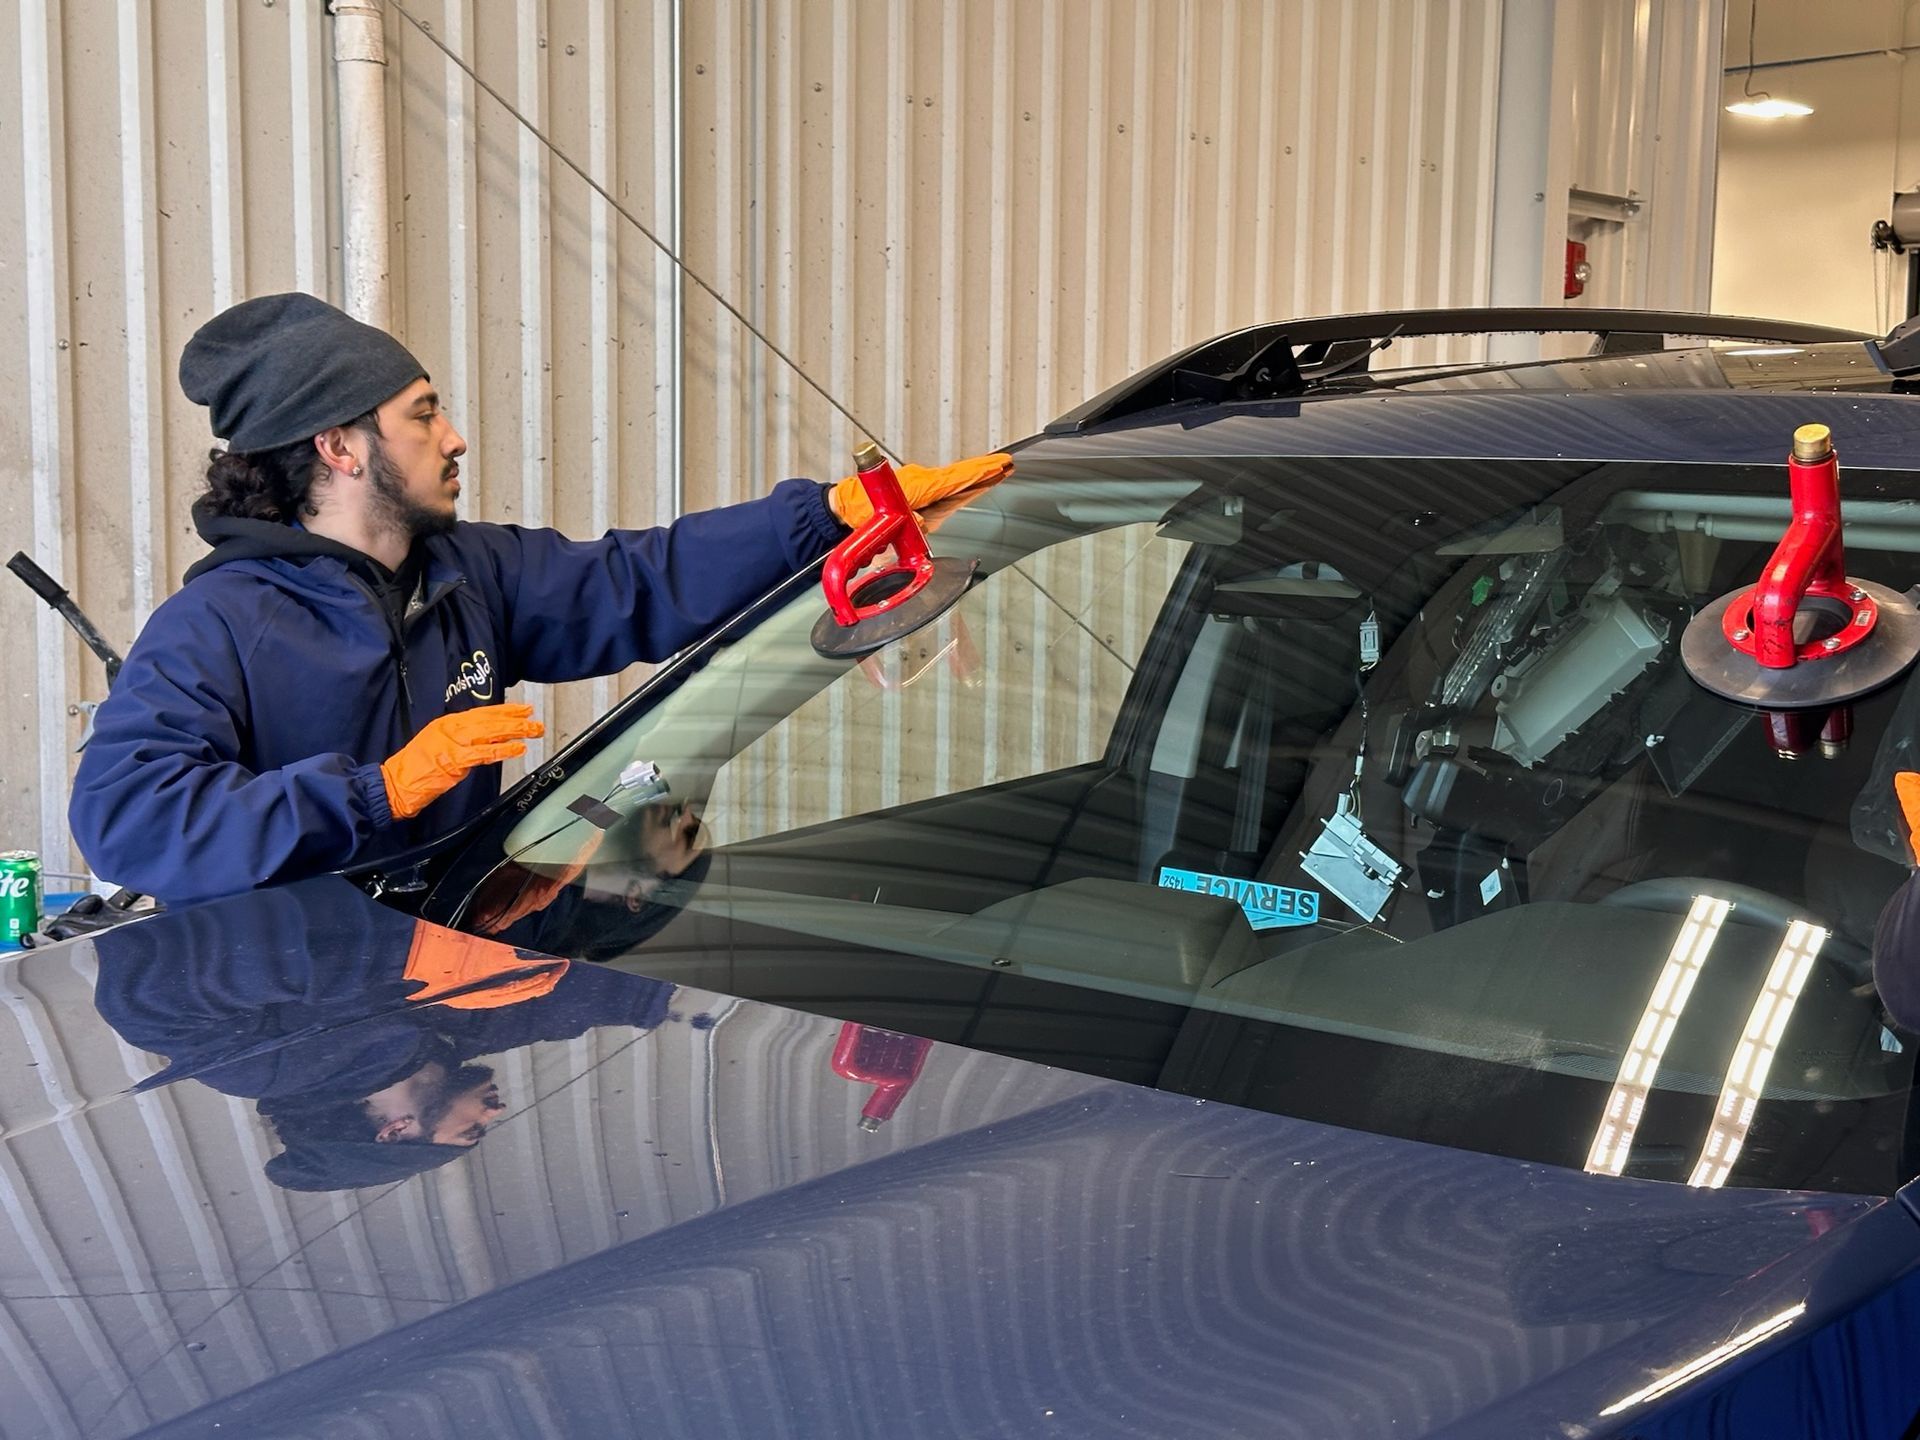 A man is installing a windshield on a car.